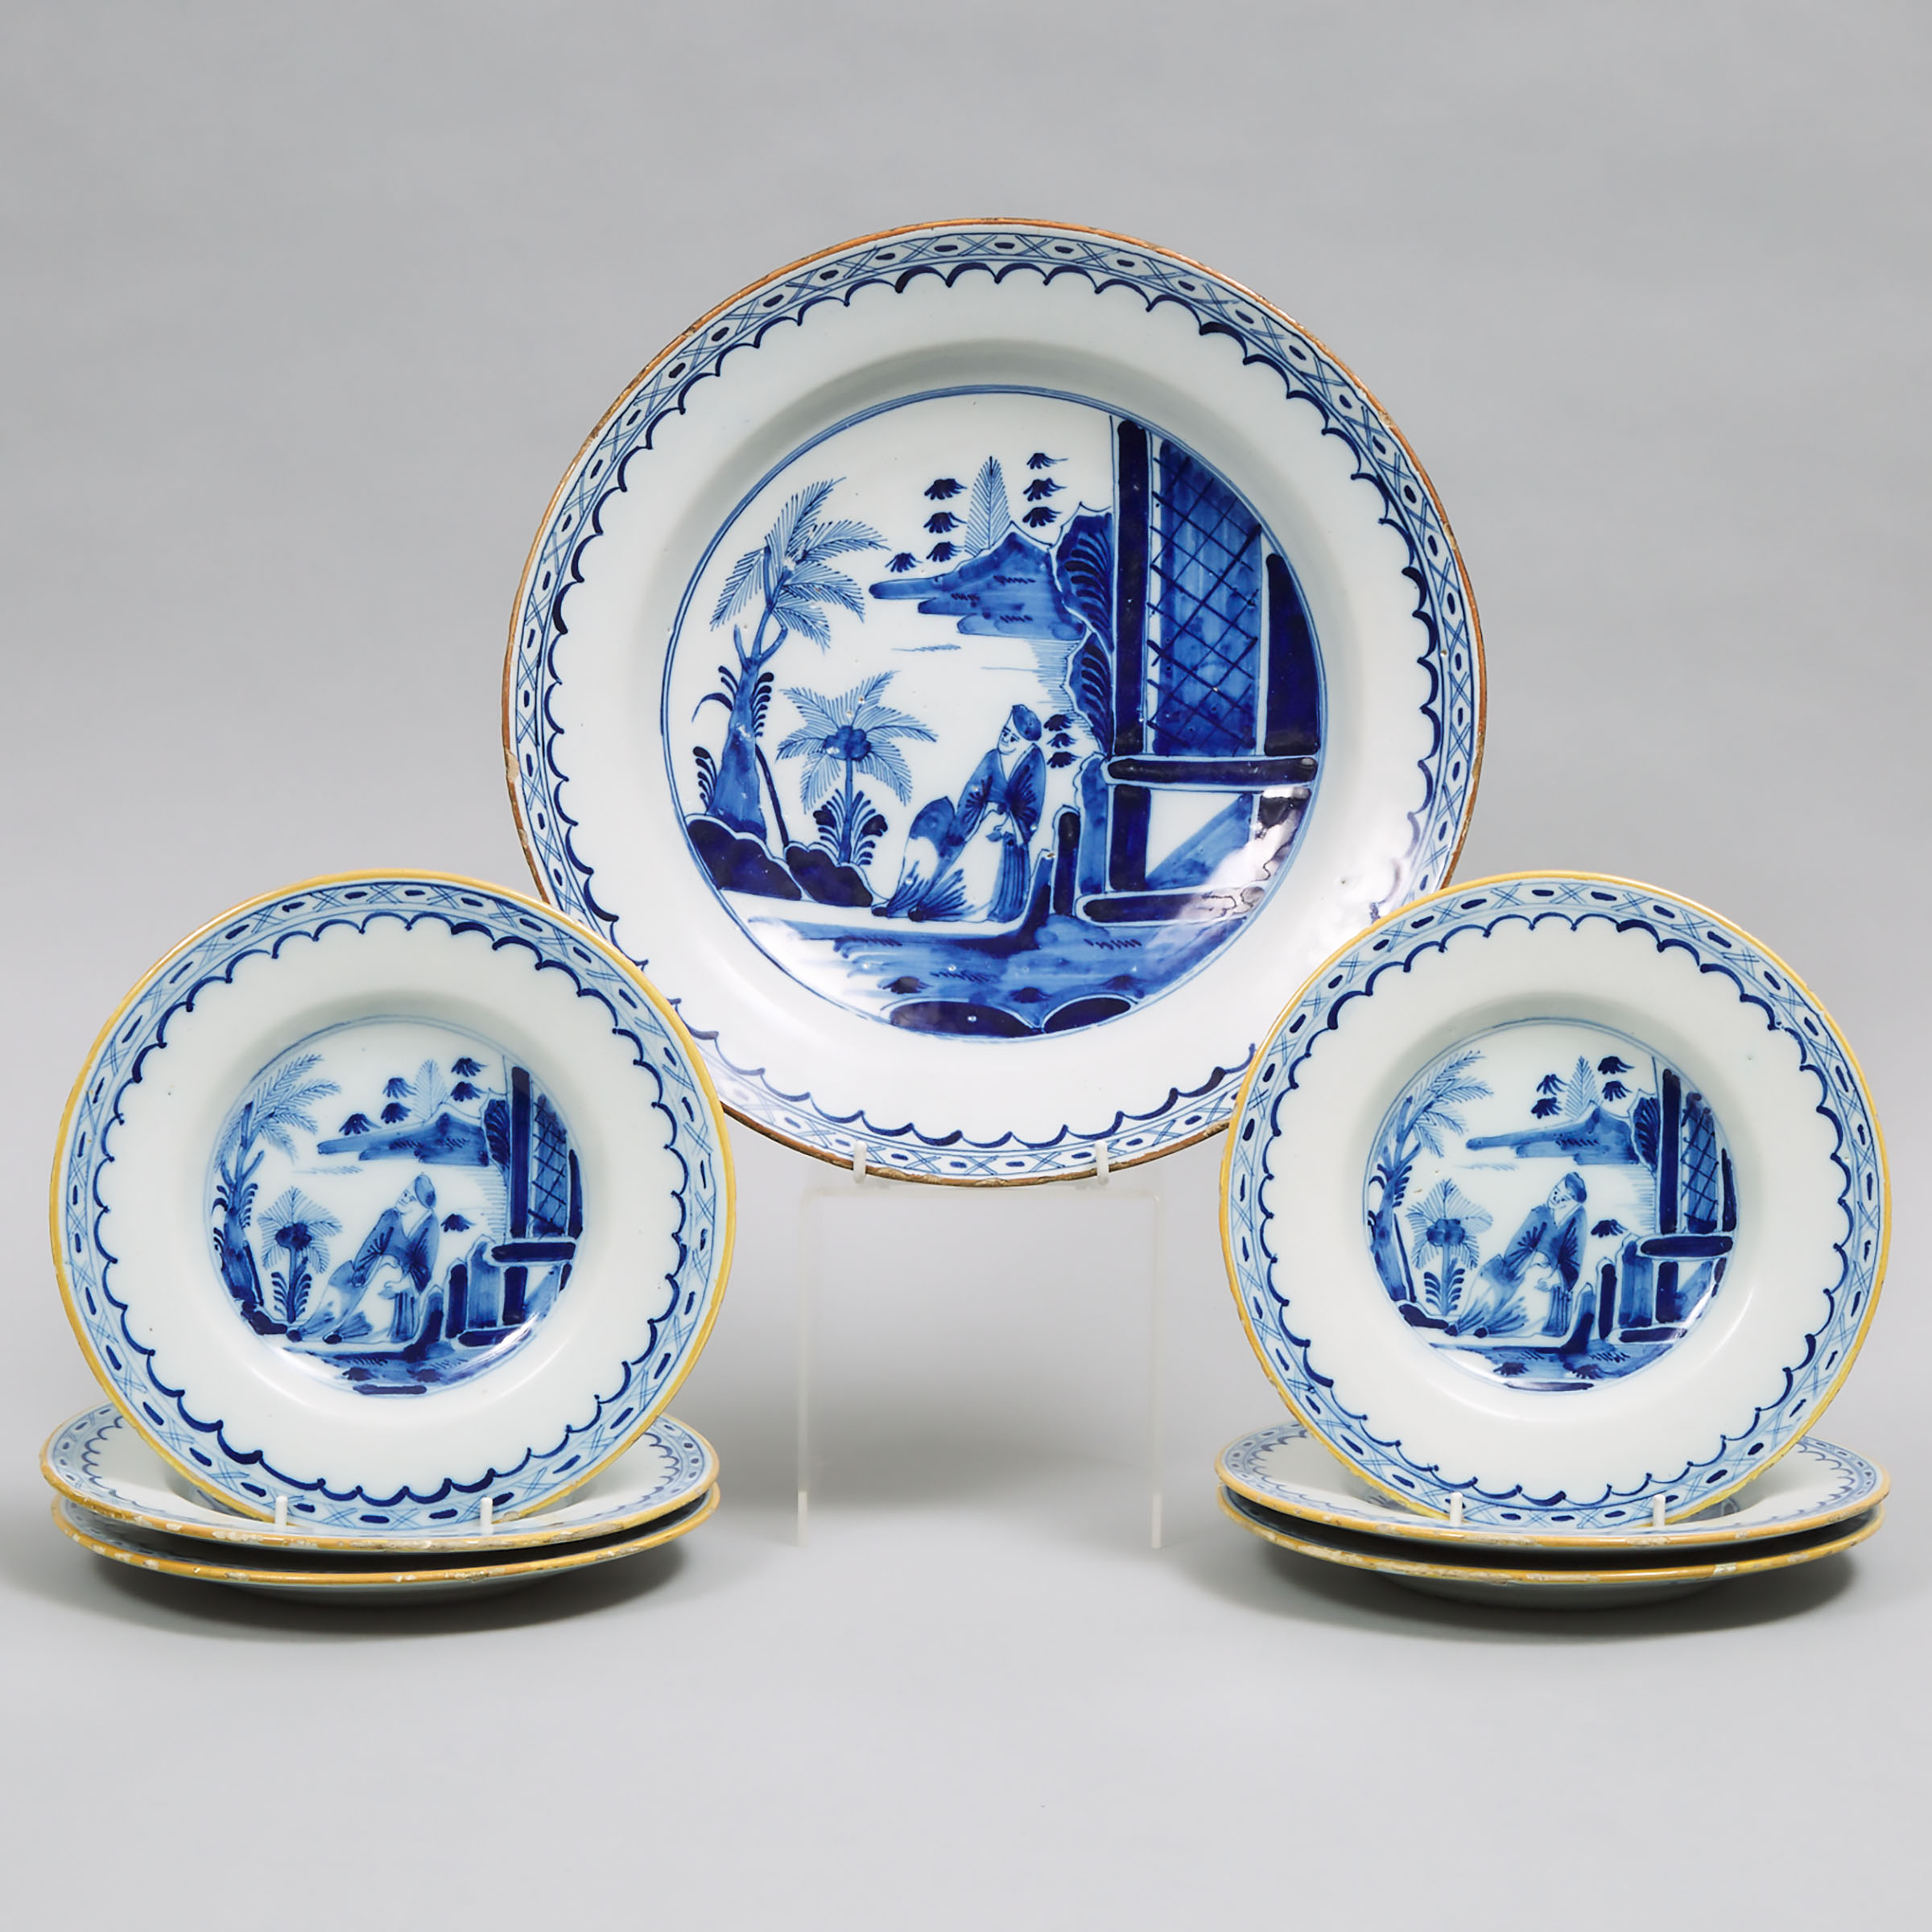 Delft Blue Painted Charger and Six Plates, 18th century